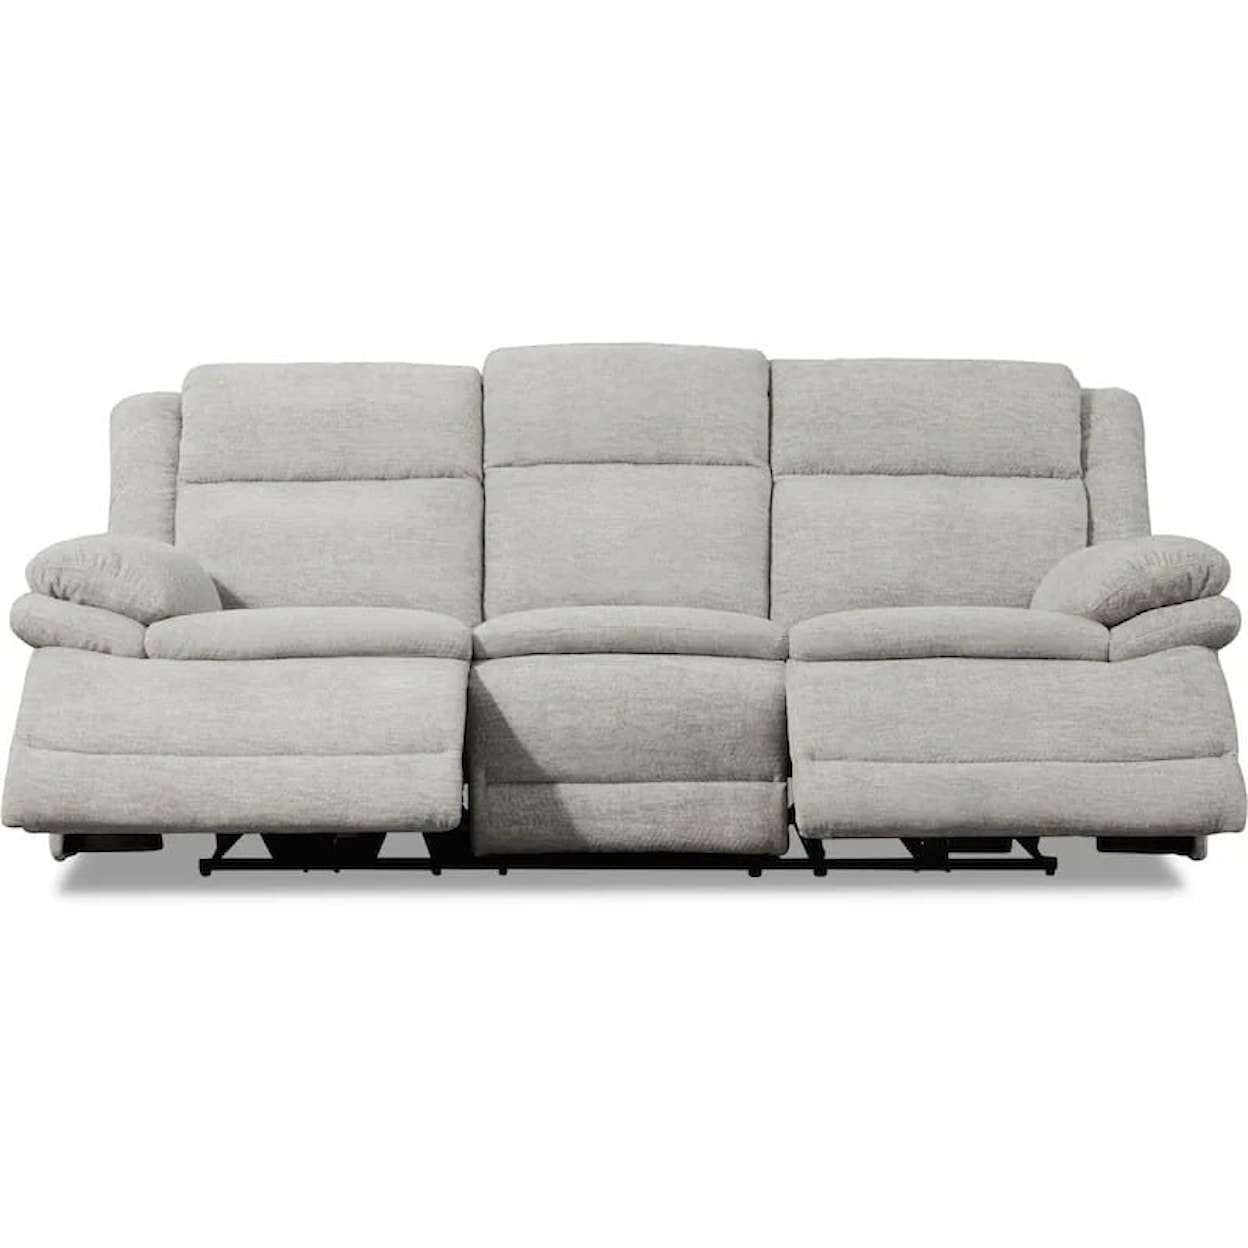 Stanbrook Home Pacific Manual Reclining Sofa